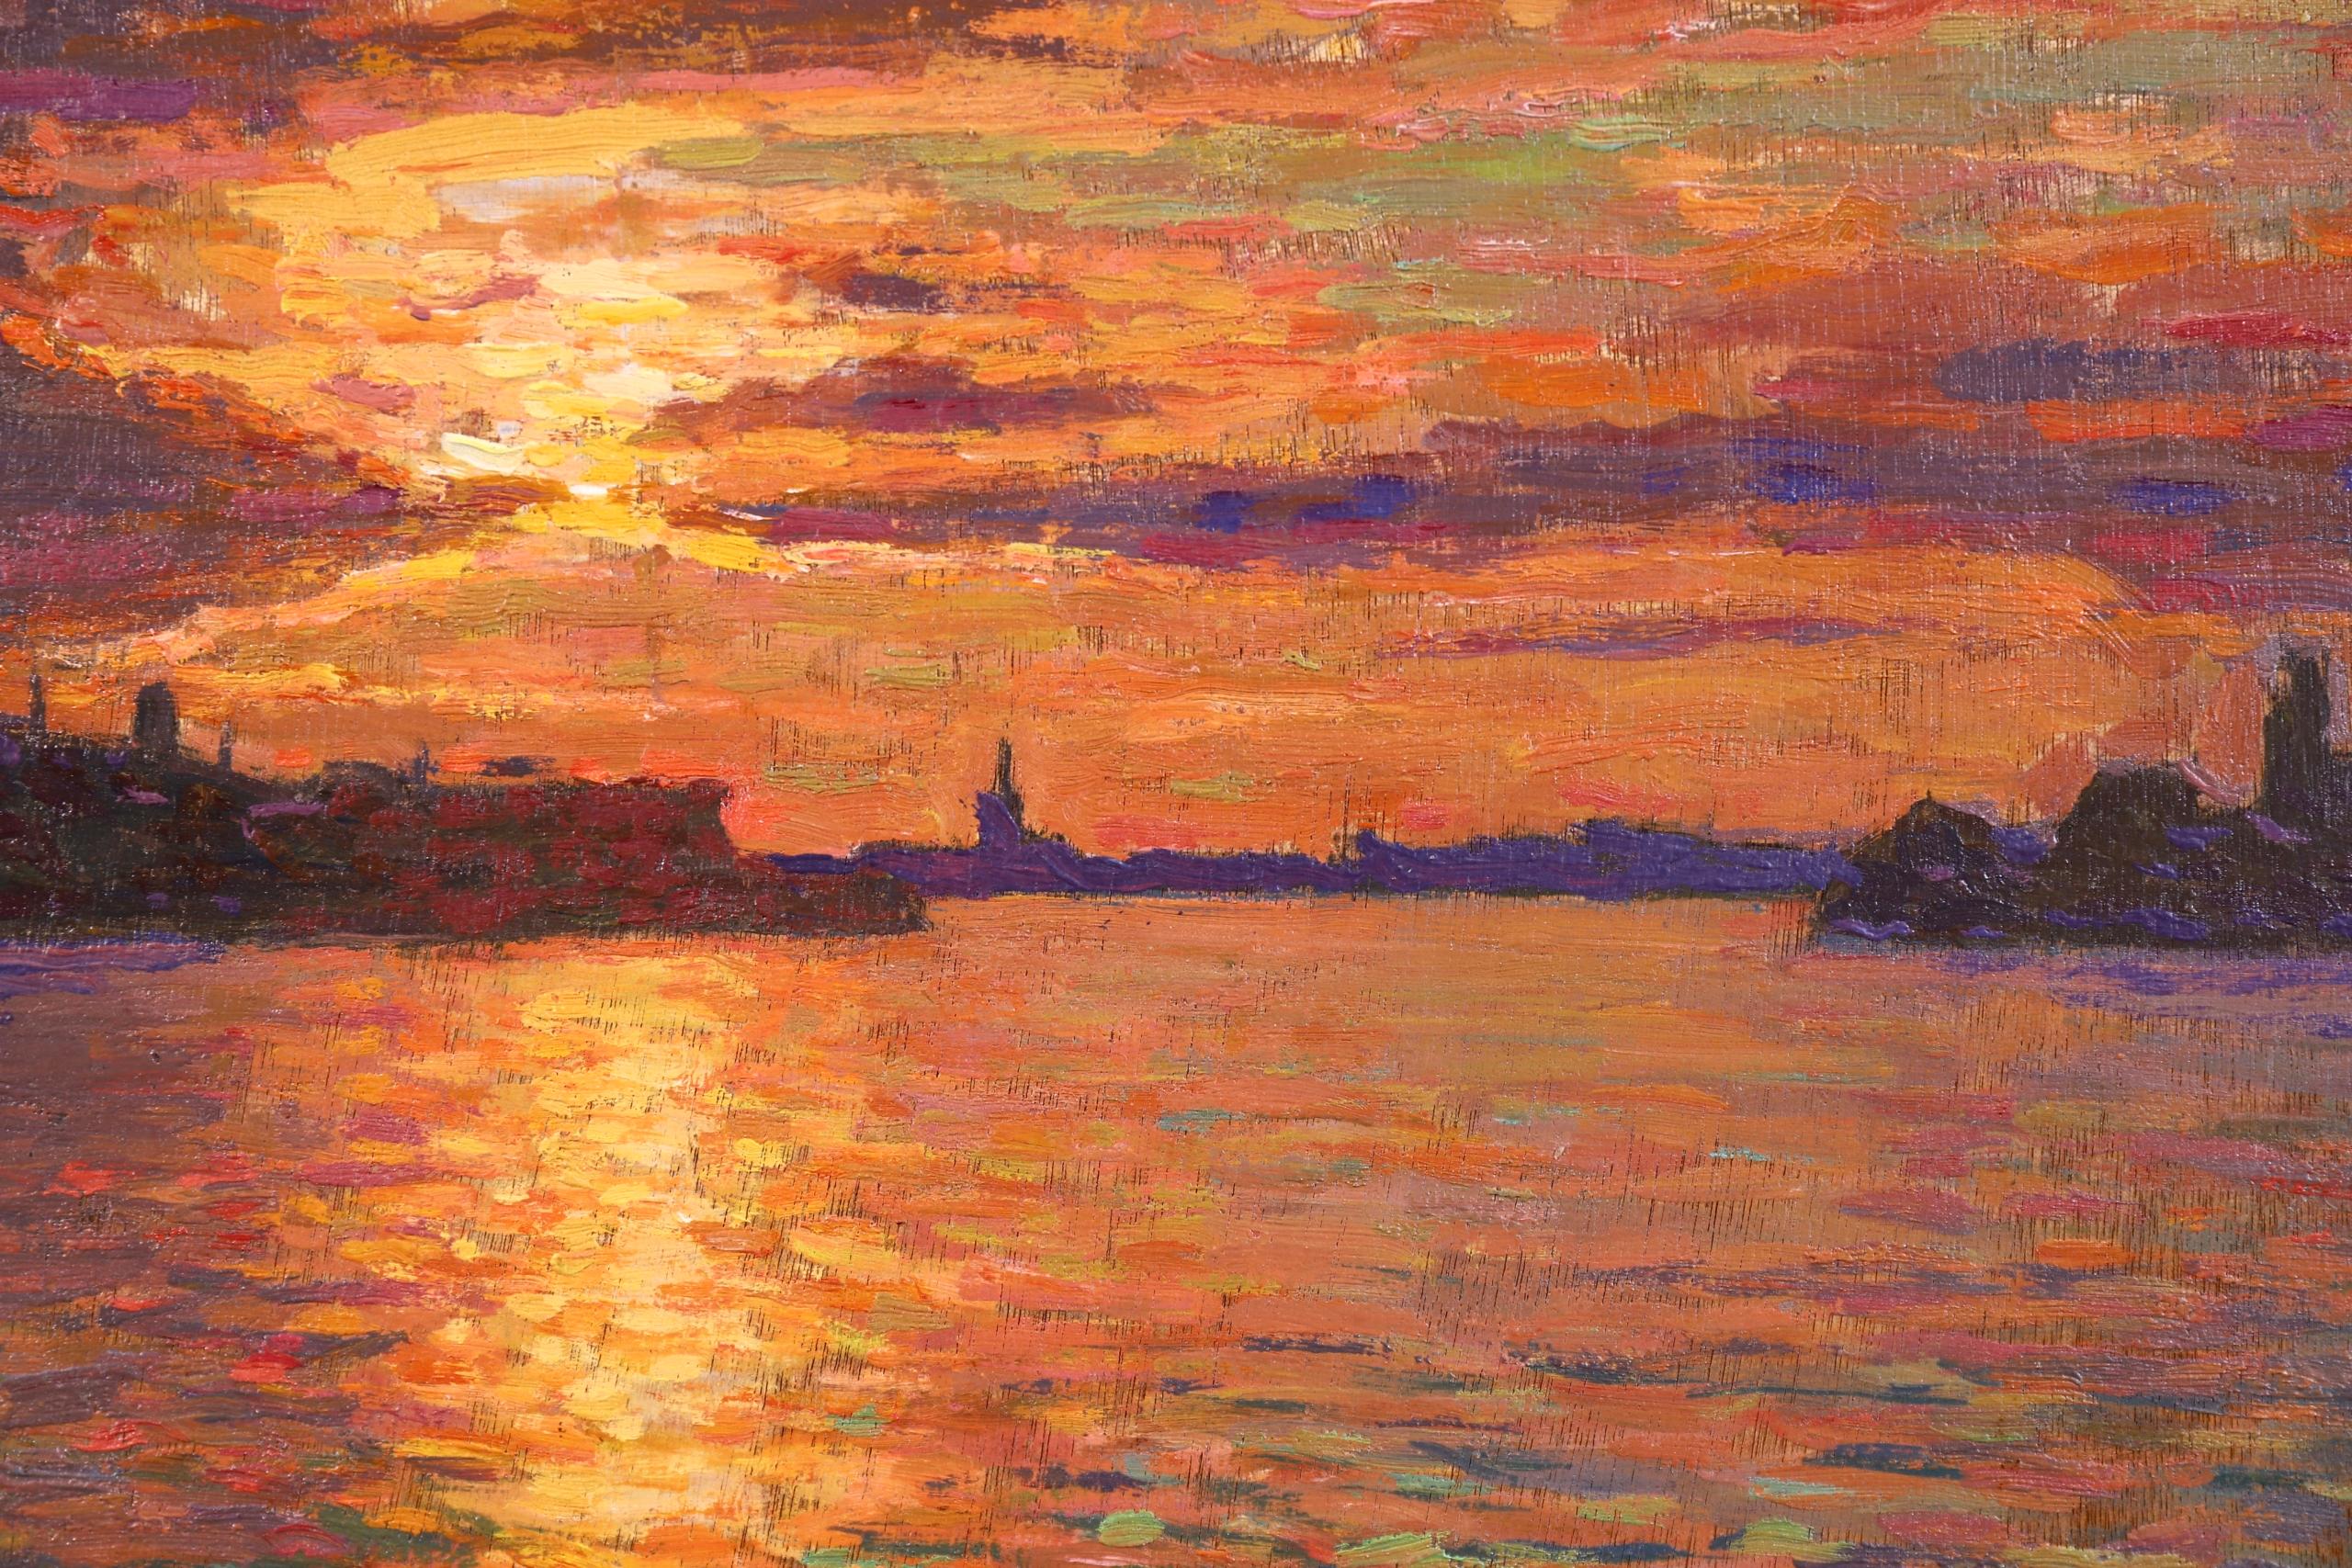 Sunset - Amsterdam - Post Impressionist Oil, Seascape - Jacques Martin-Ferrieres 1